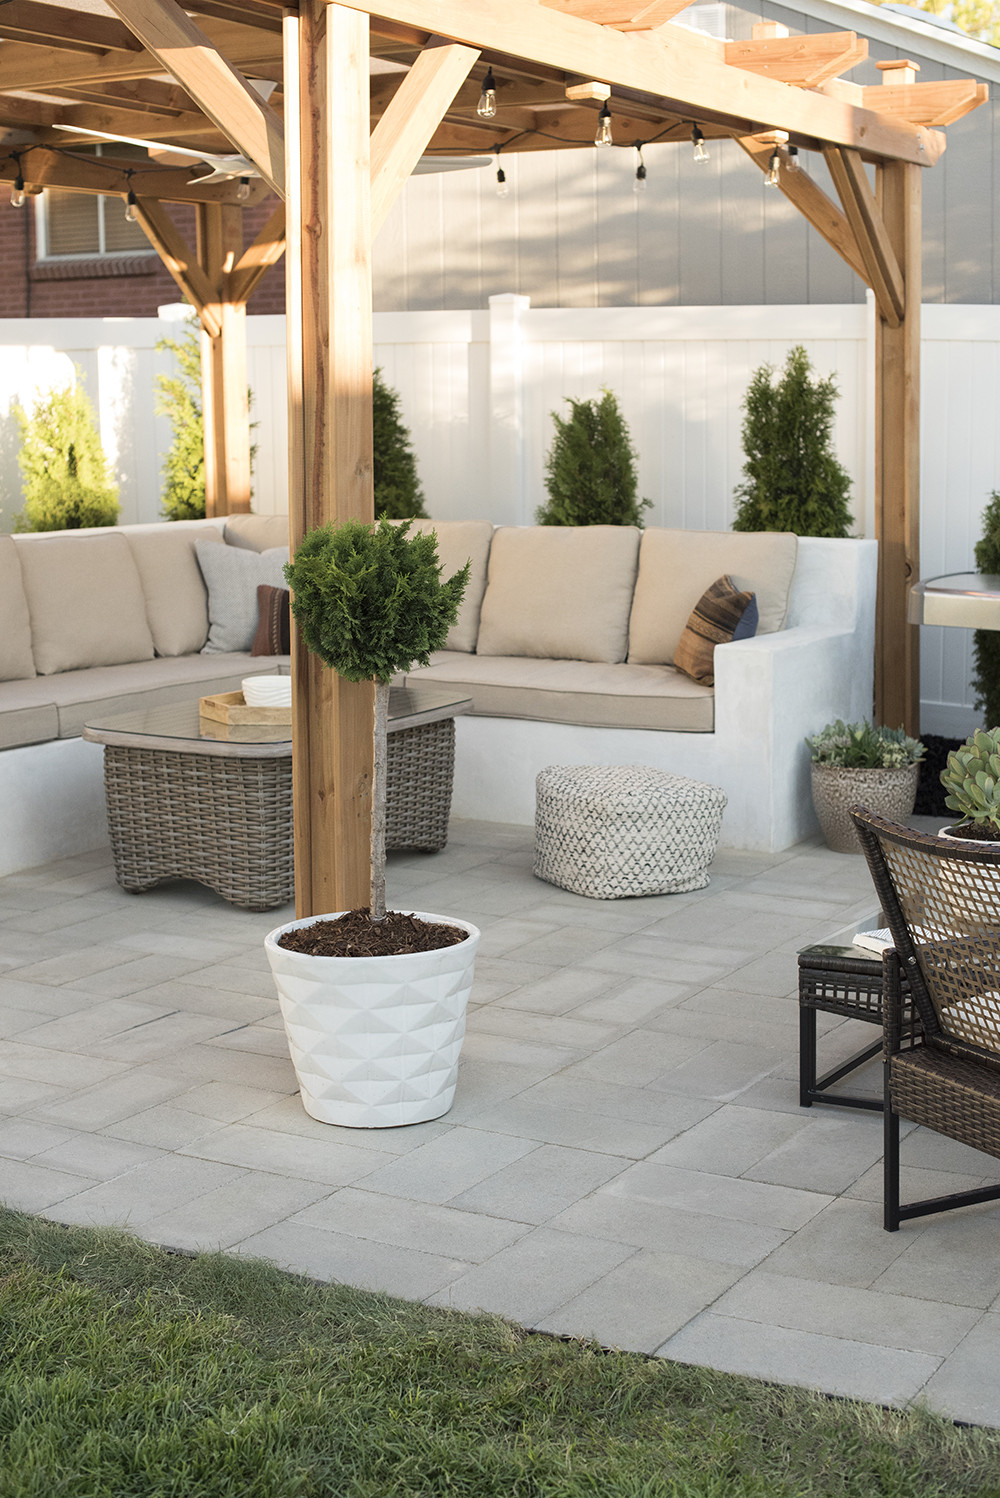 Best ideas about DIY Backyard Patios . Save or Pin How to Install A Custom Paver Patio Room for Tuesday Blog Now.